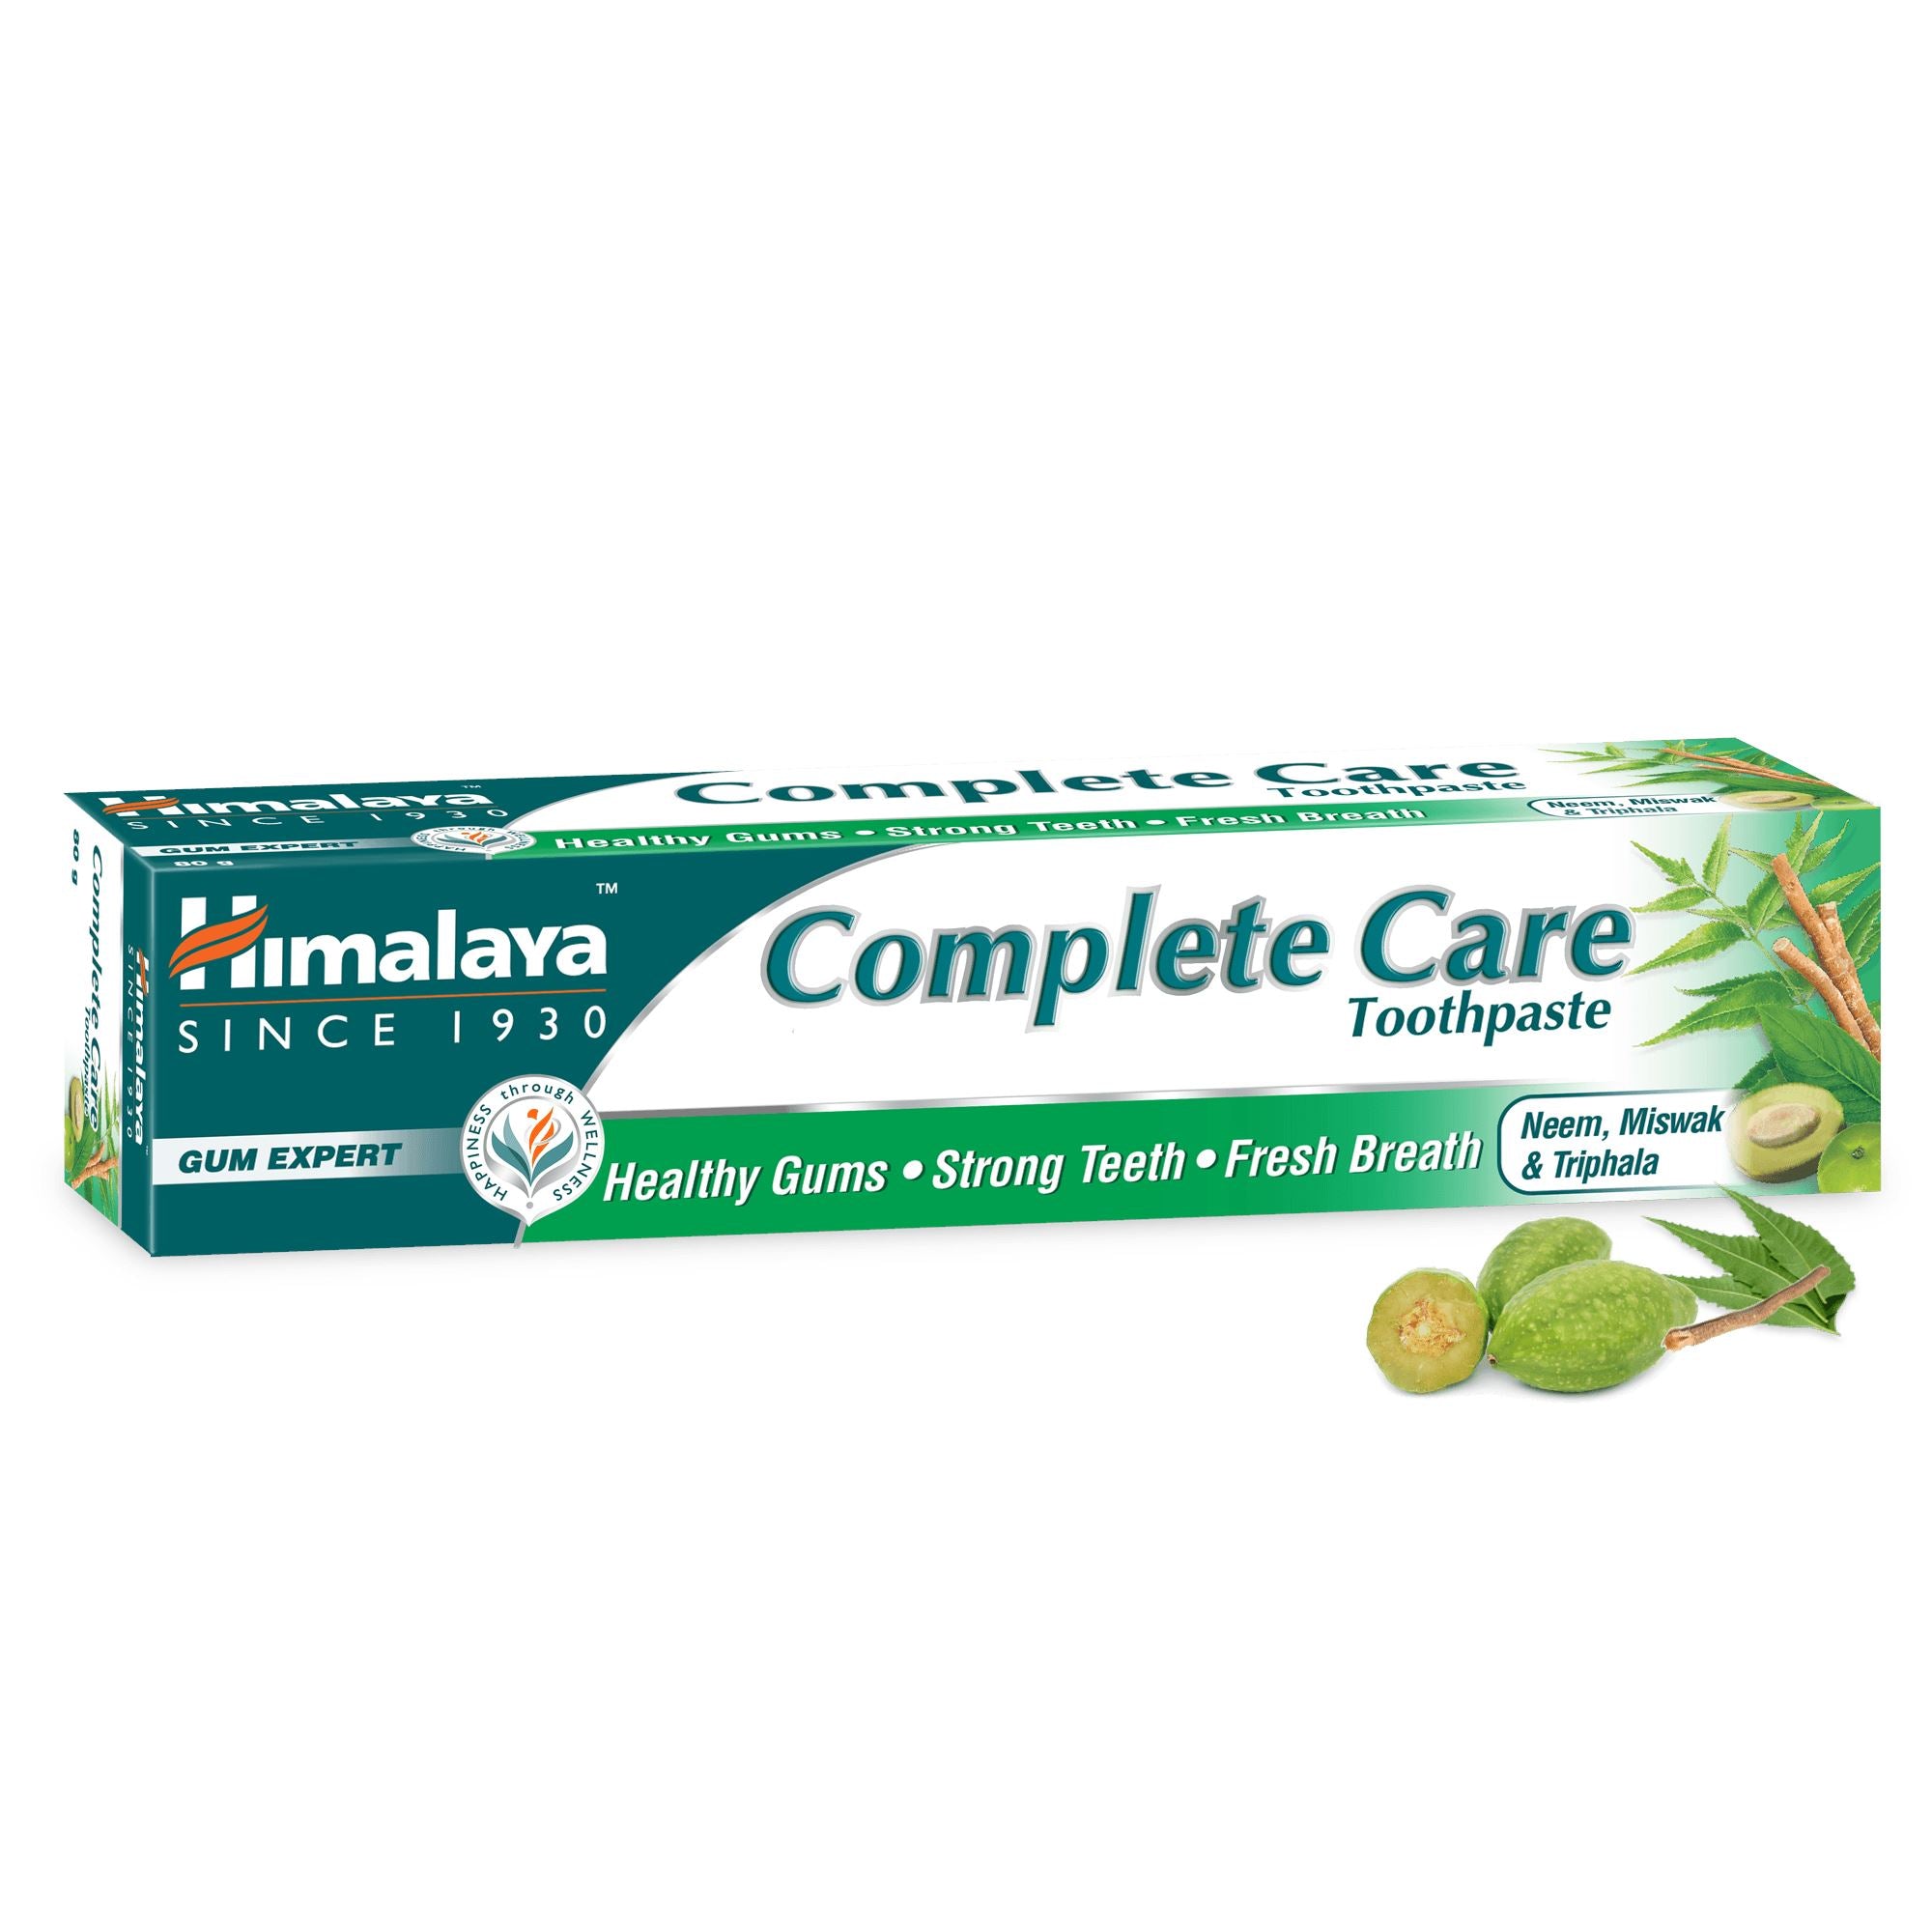 Himalaya Complete Care Toothpaste - Healthy gums & Strong